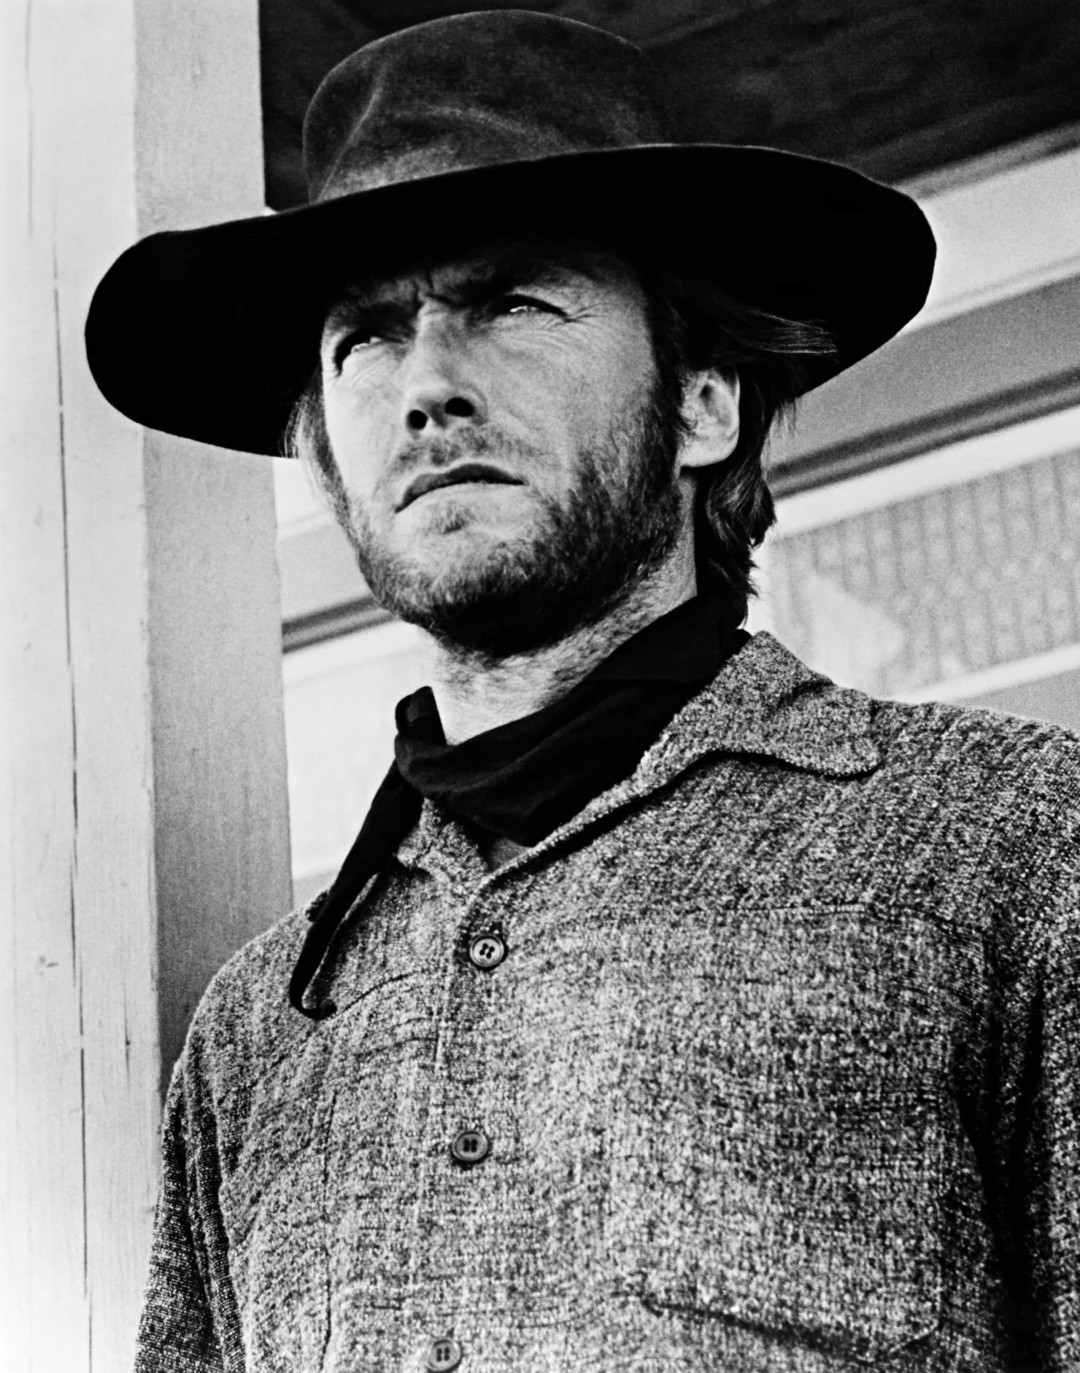 Clint Eastwood: 5 Of His Best Movies And Worst The 15 Eastwood Films ...